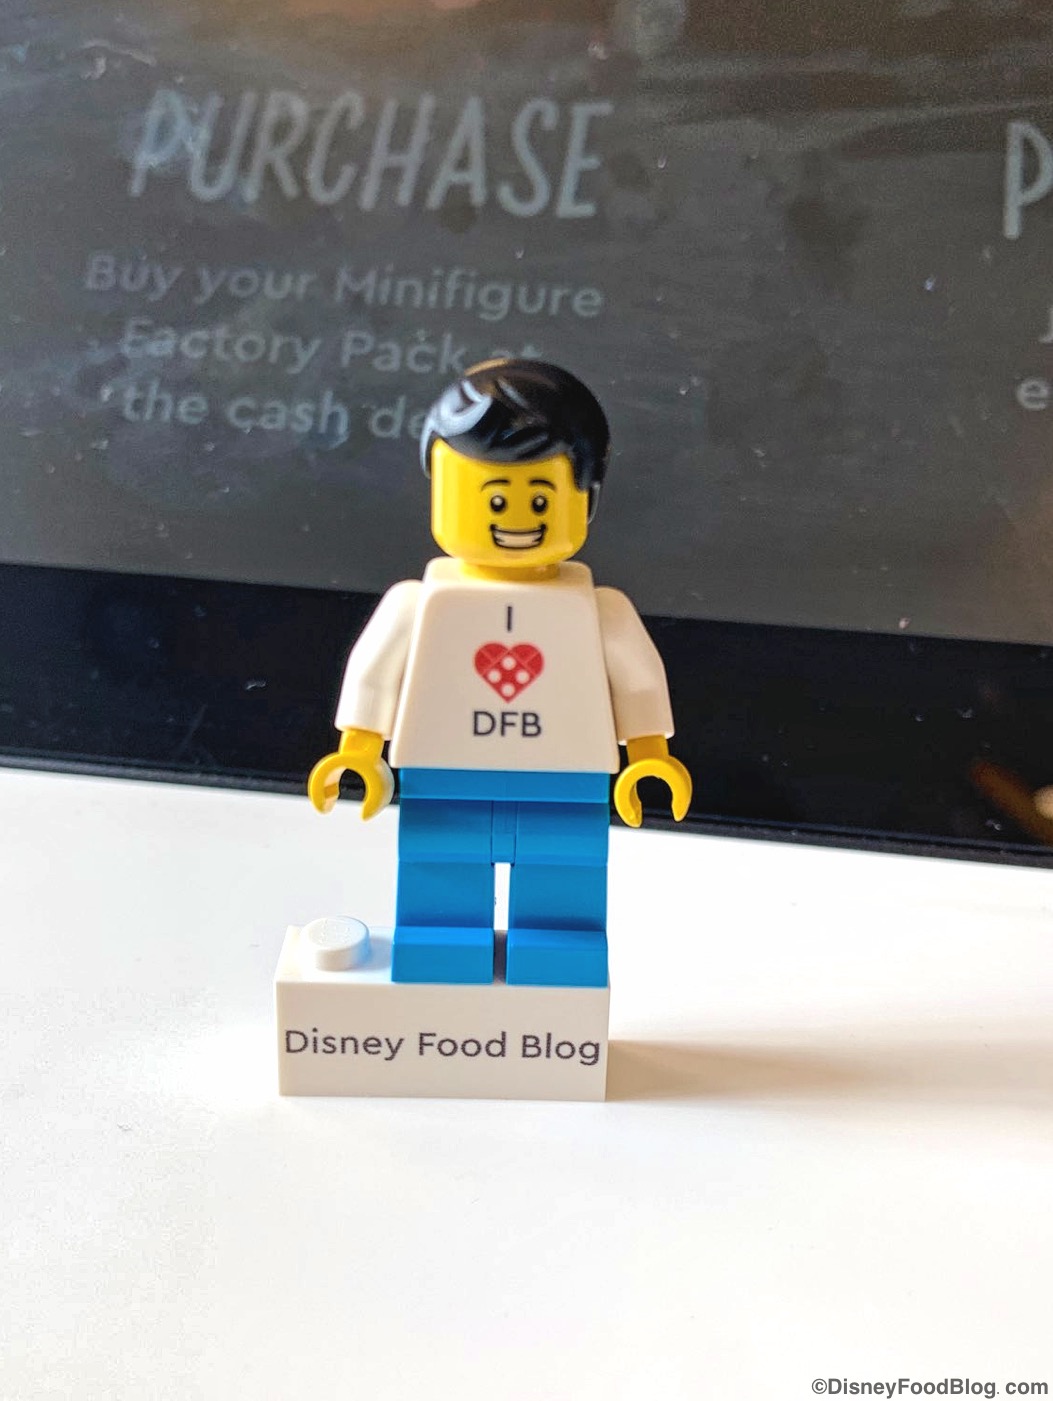 PHOTOS: This LEGO Figure From Downtown Disney is DFB's Biggest Fan